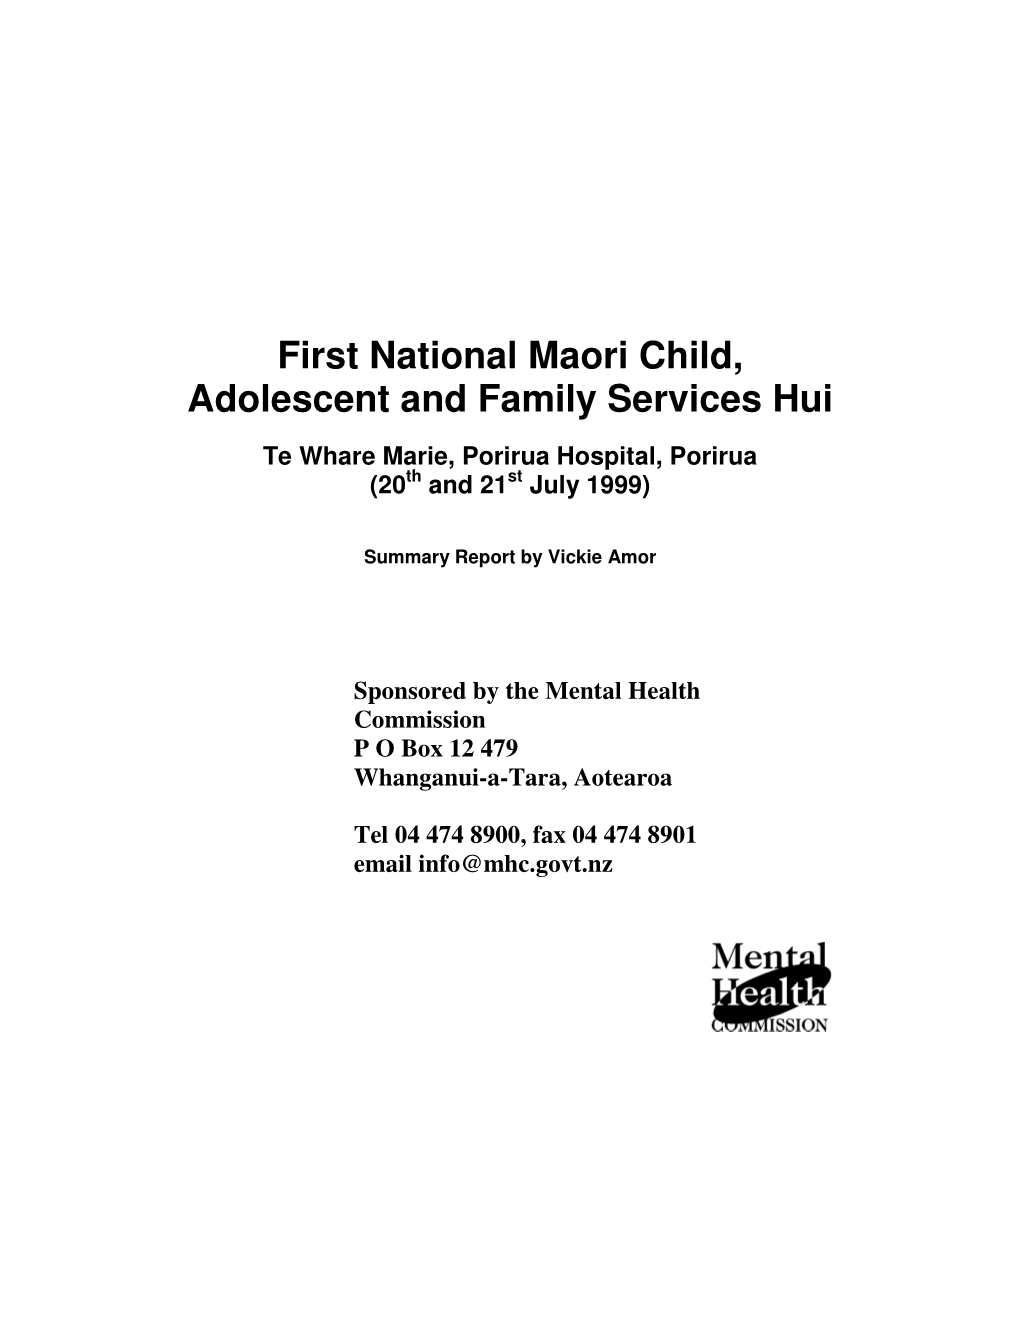 First National Maori Child, Adolescent and Family Services Hui